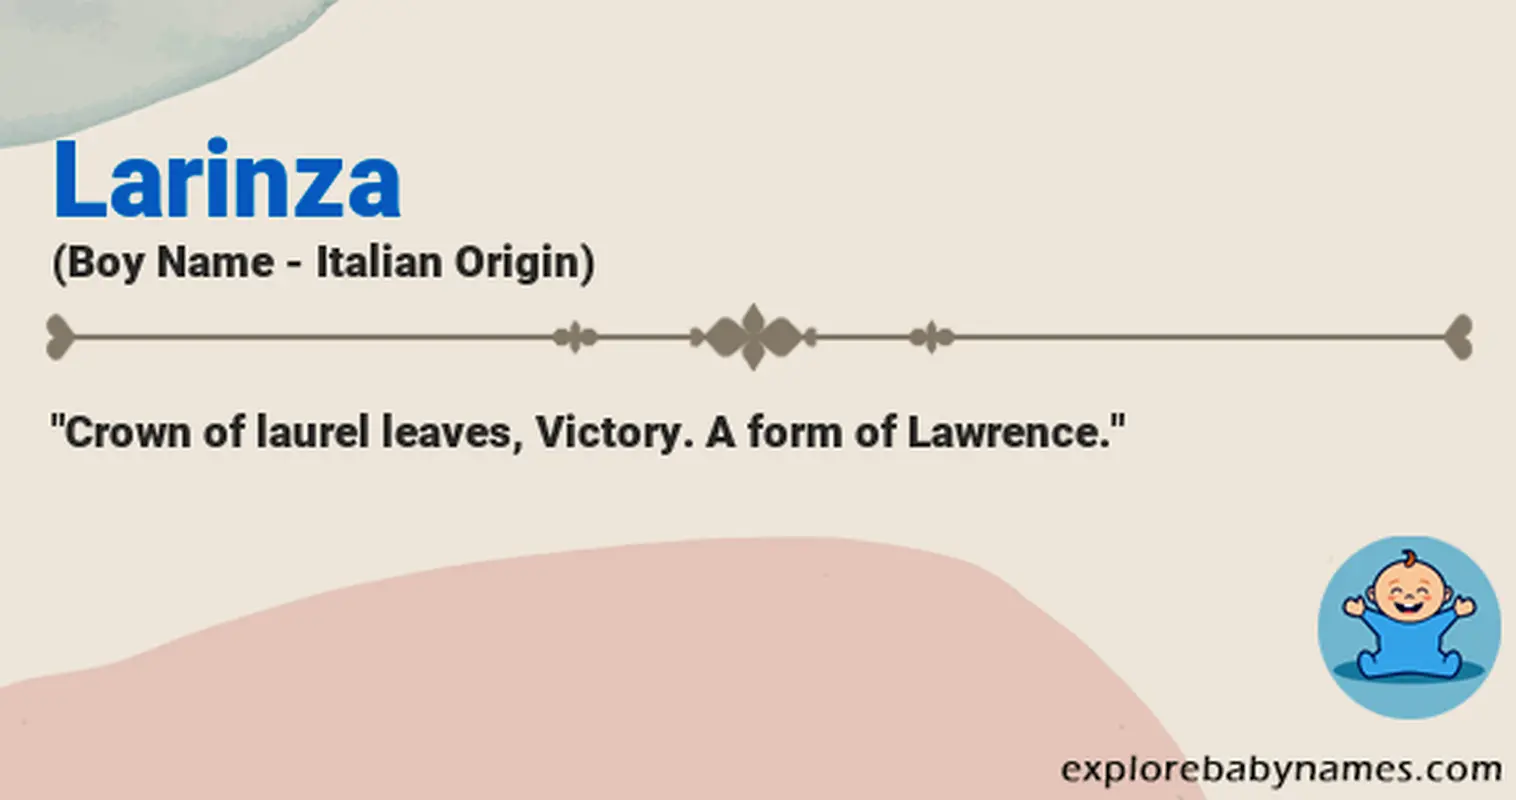 Meaning of Larinza